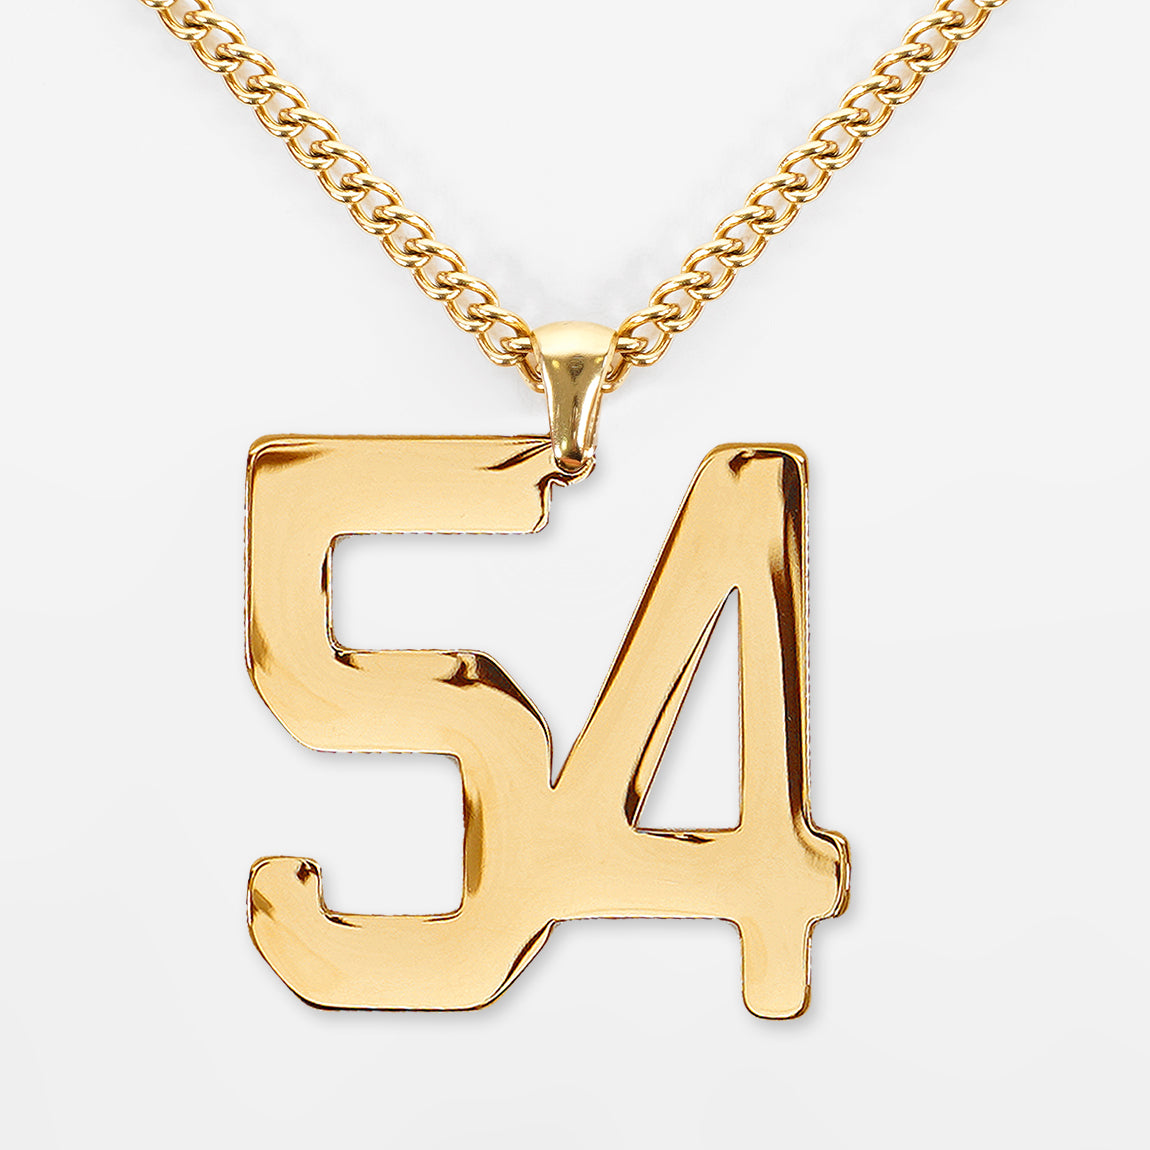 54 Number Pendant with Chain Necklace - Gold Plated Stainless Steel